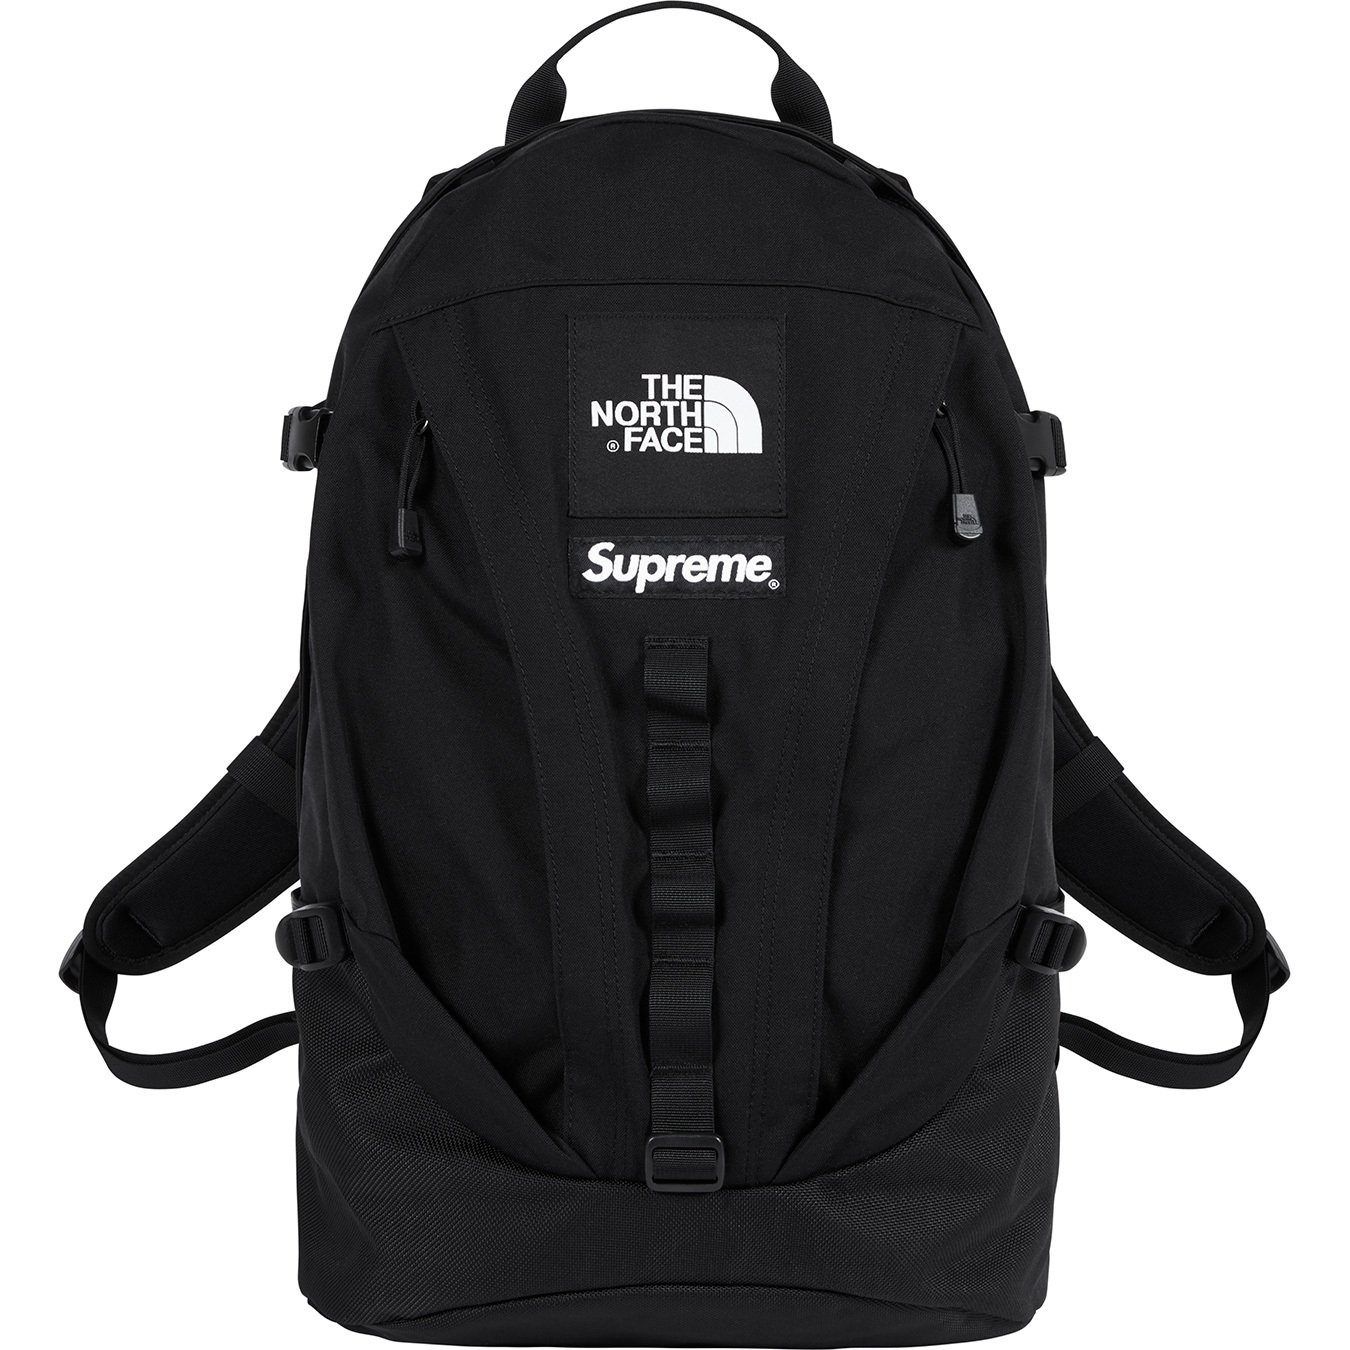 Supreme®/The North Face® Expedition Backpack - Supreme Community